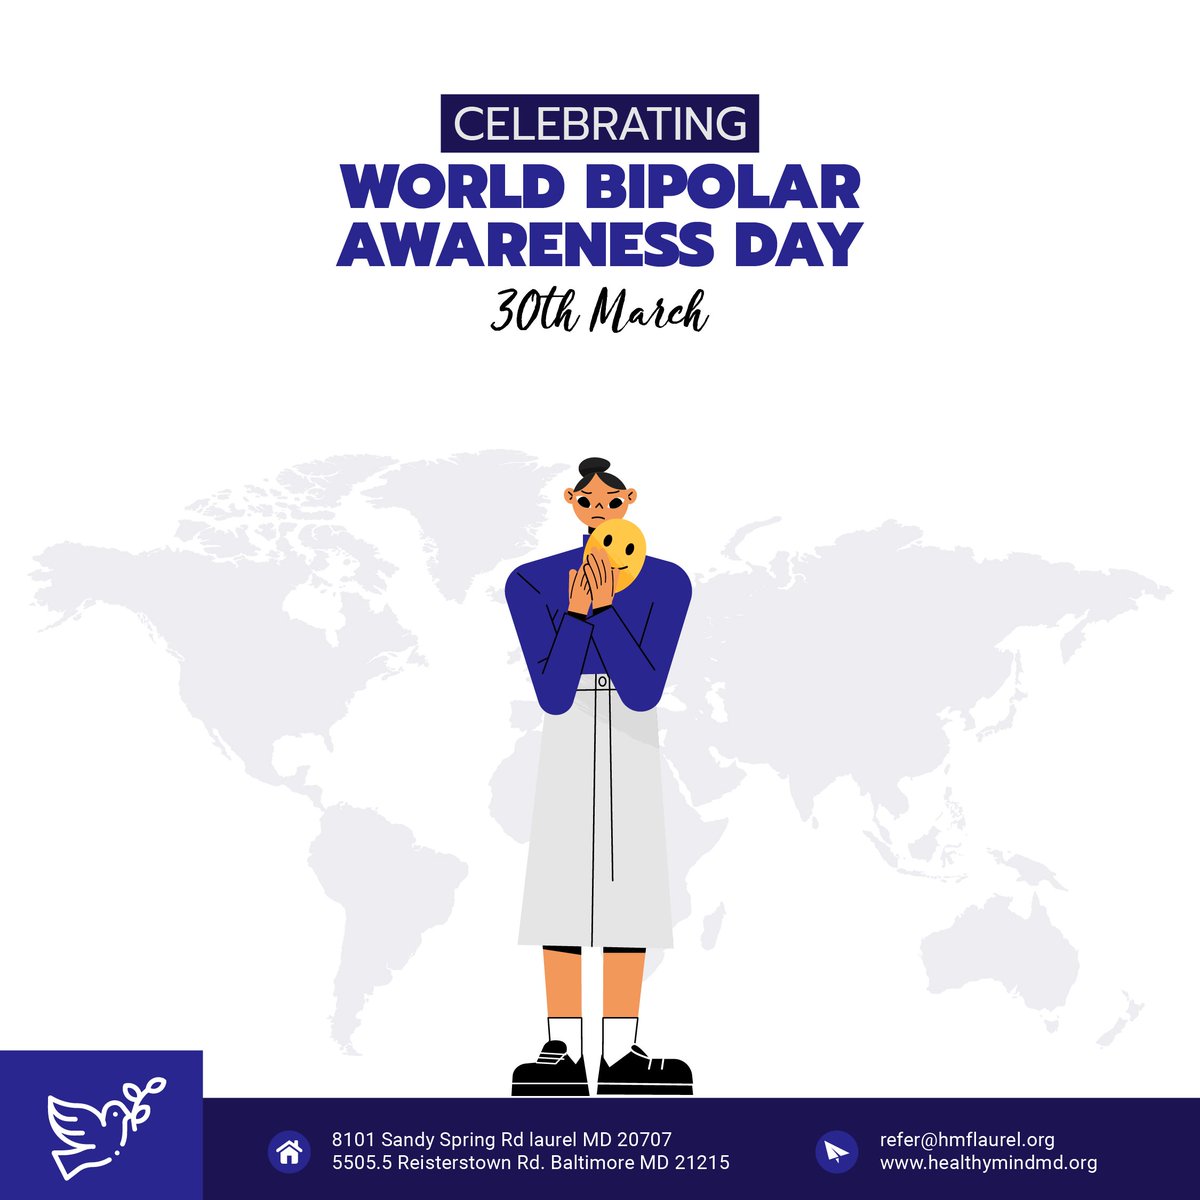 Let's use this day to raise awareness, promote understanding, and create a positive environment for everyone to thrive in. 

#worldbipolarday #bipolarday #healthymindhealthylife #healthymindfoundation #mentalhealthrecovery